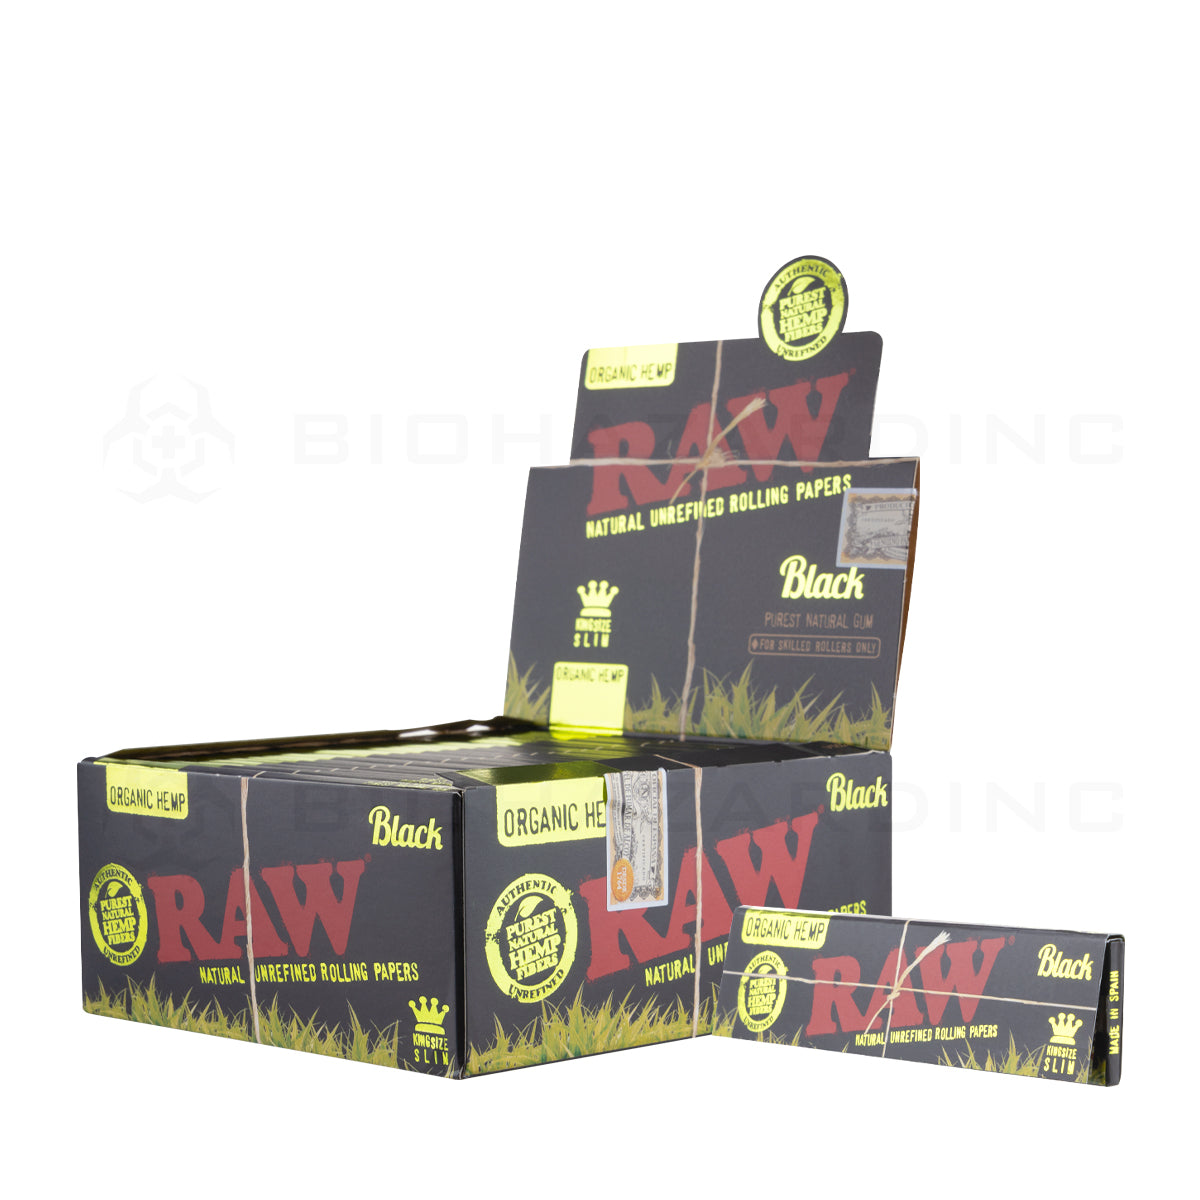 RAW® | 'Retail Display' Black Unbleached Rolling Papers | Organic Hemp - Various Sizes Rolling Papers Raw King Slim - 110mm - 32/Pack - 50 Count  